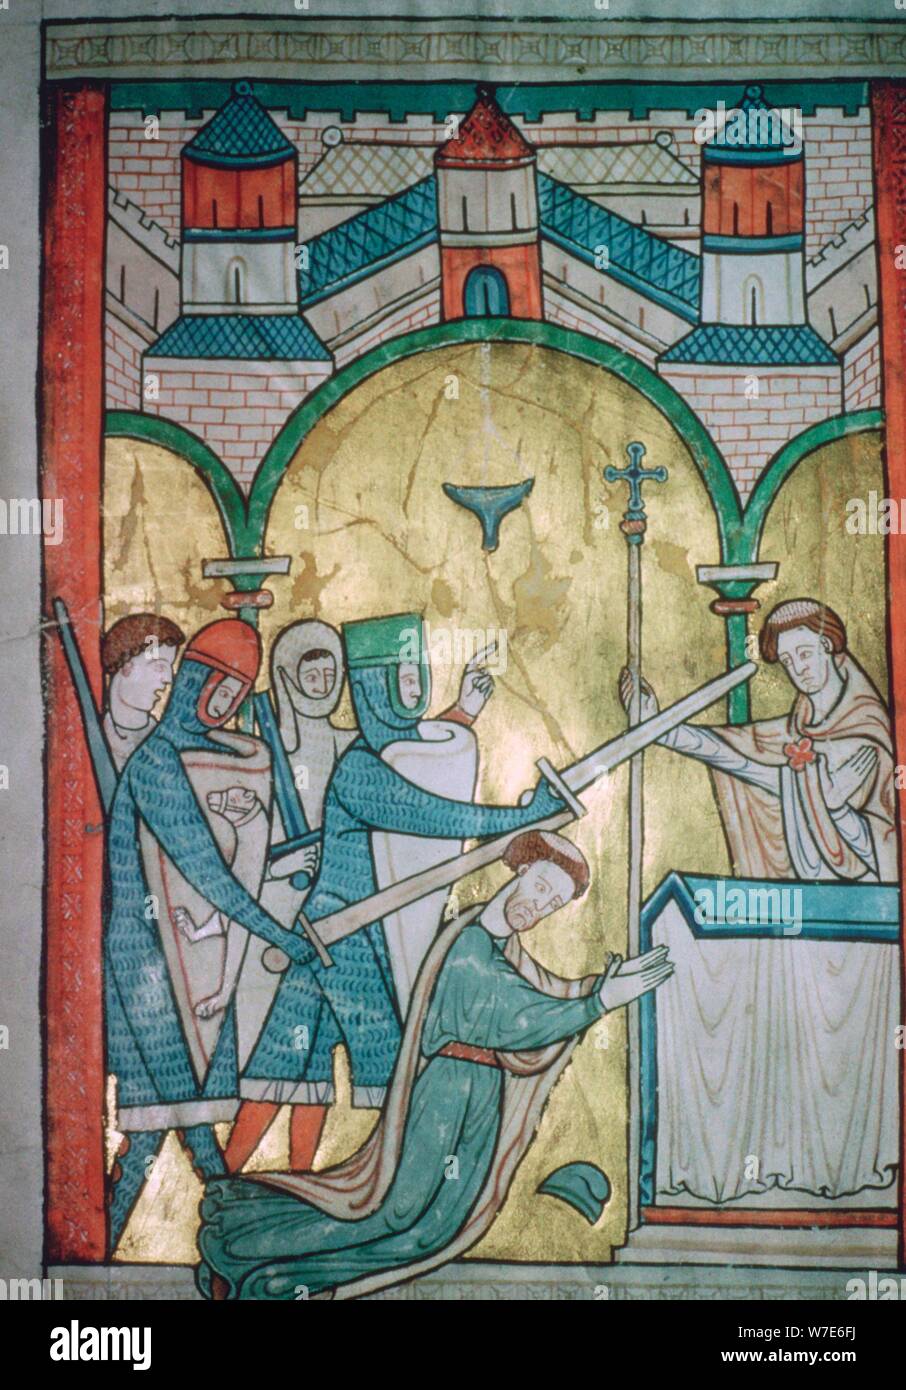 Twelfth century illustration of the murder of St Thomas-a-Becket (1118-1170) from a psalter. Stock Photo